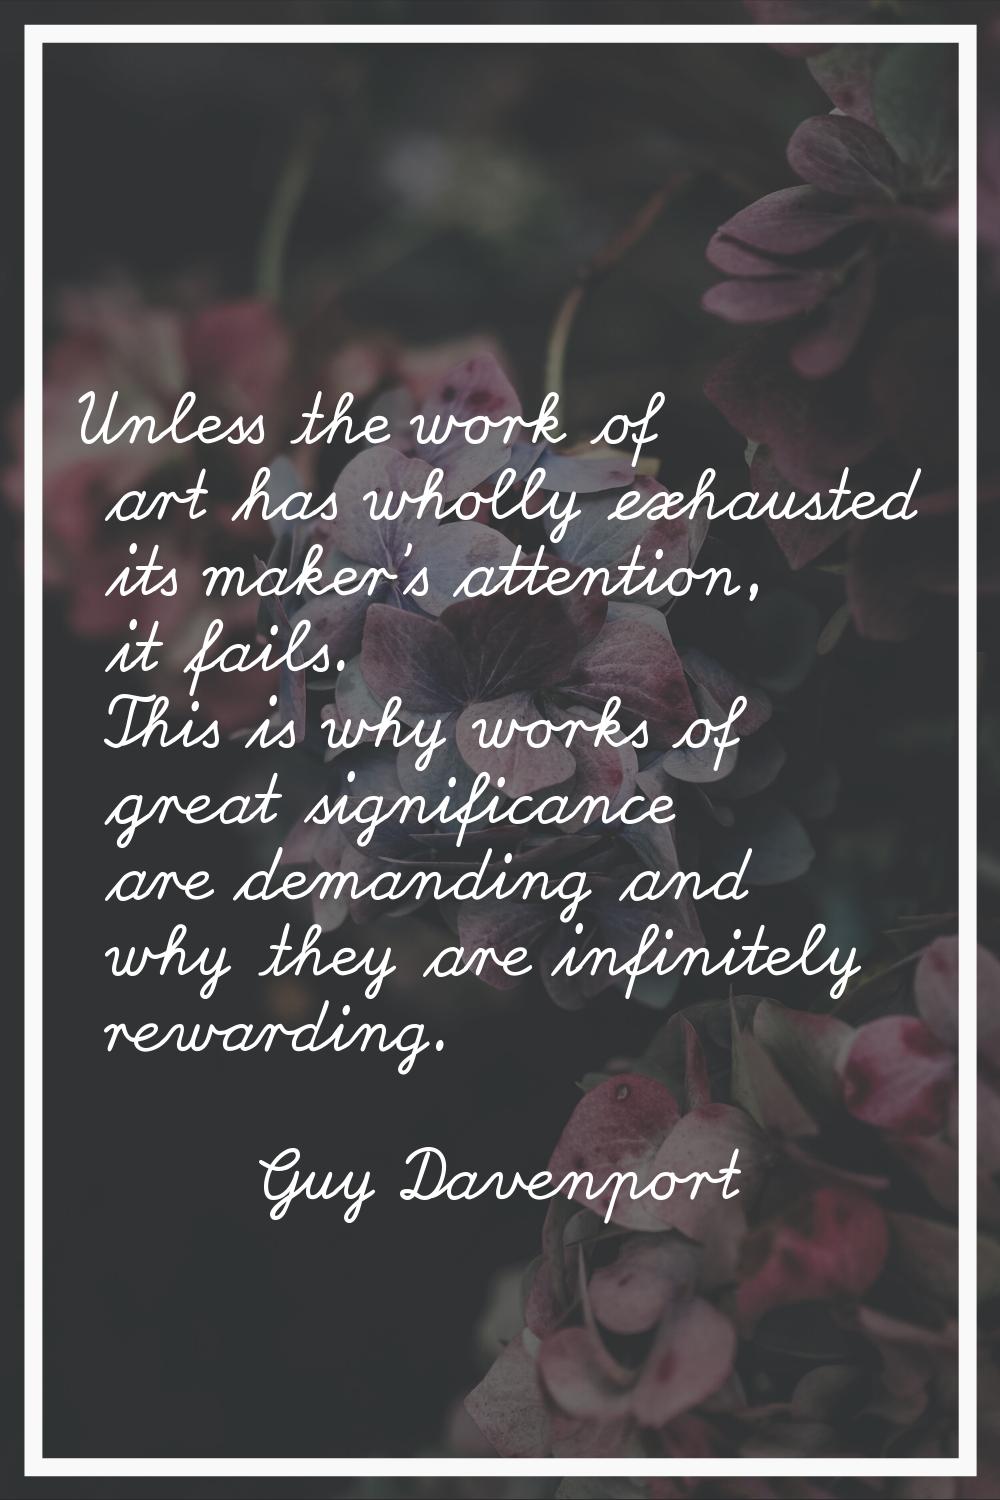 Unless the work of art has wholly exhausted its maker's attention, it fails. This is why works of g